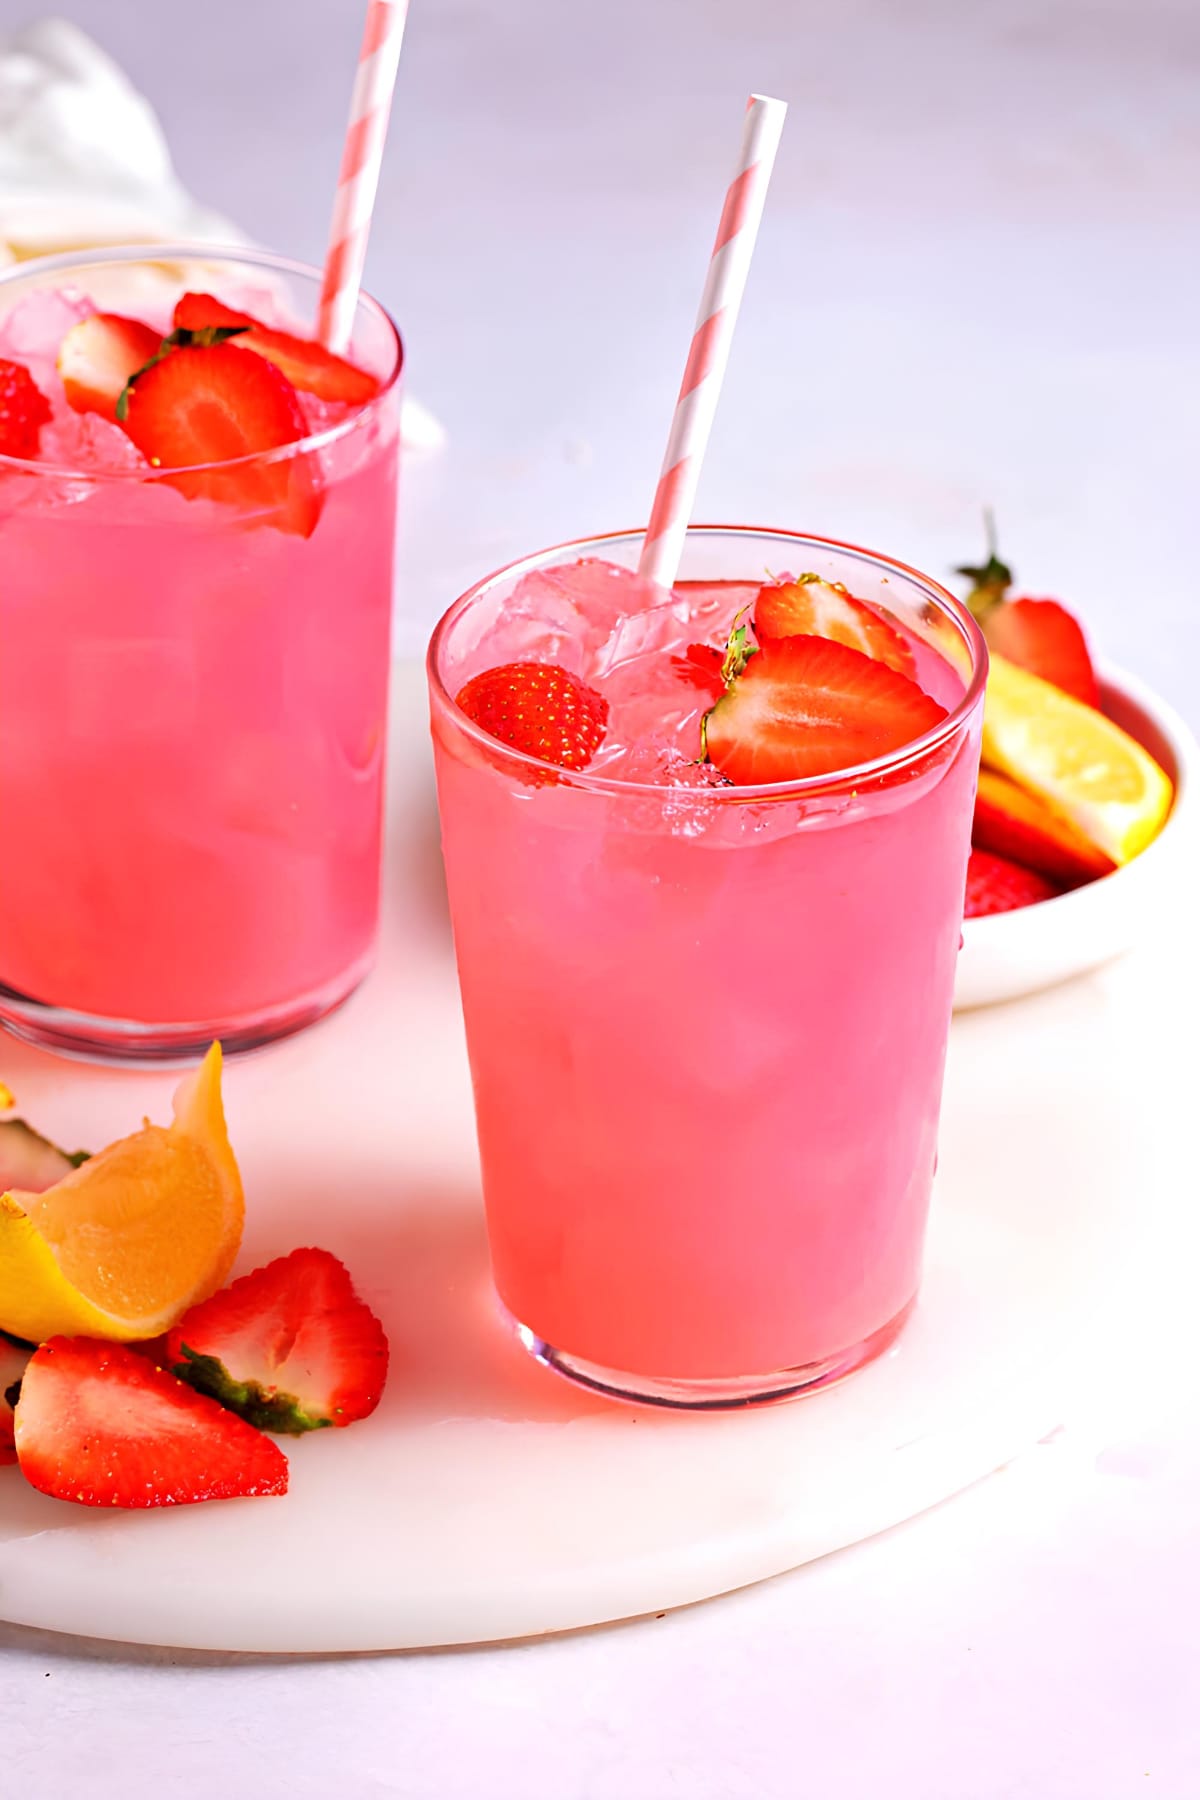 Two glasses of hippie juice garnished with slices of strawberries.